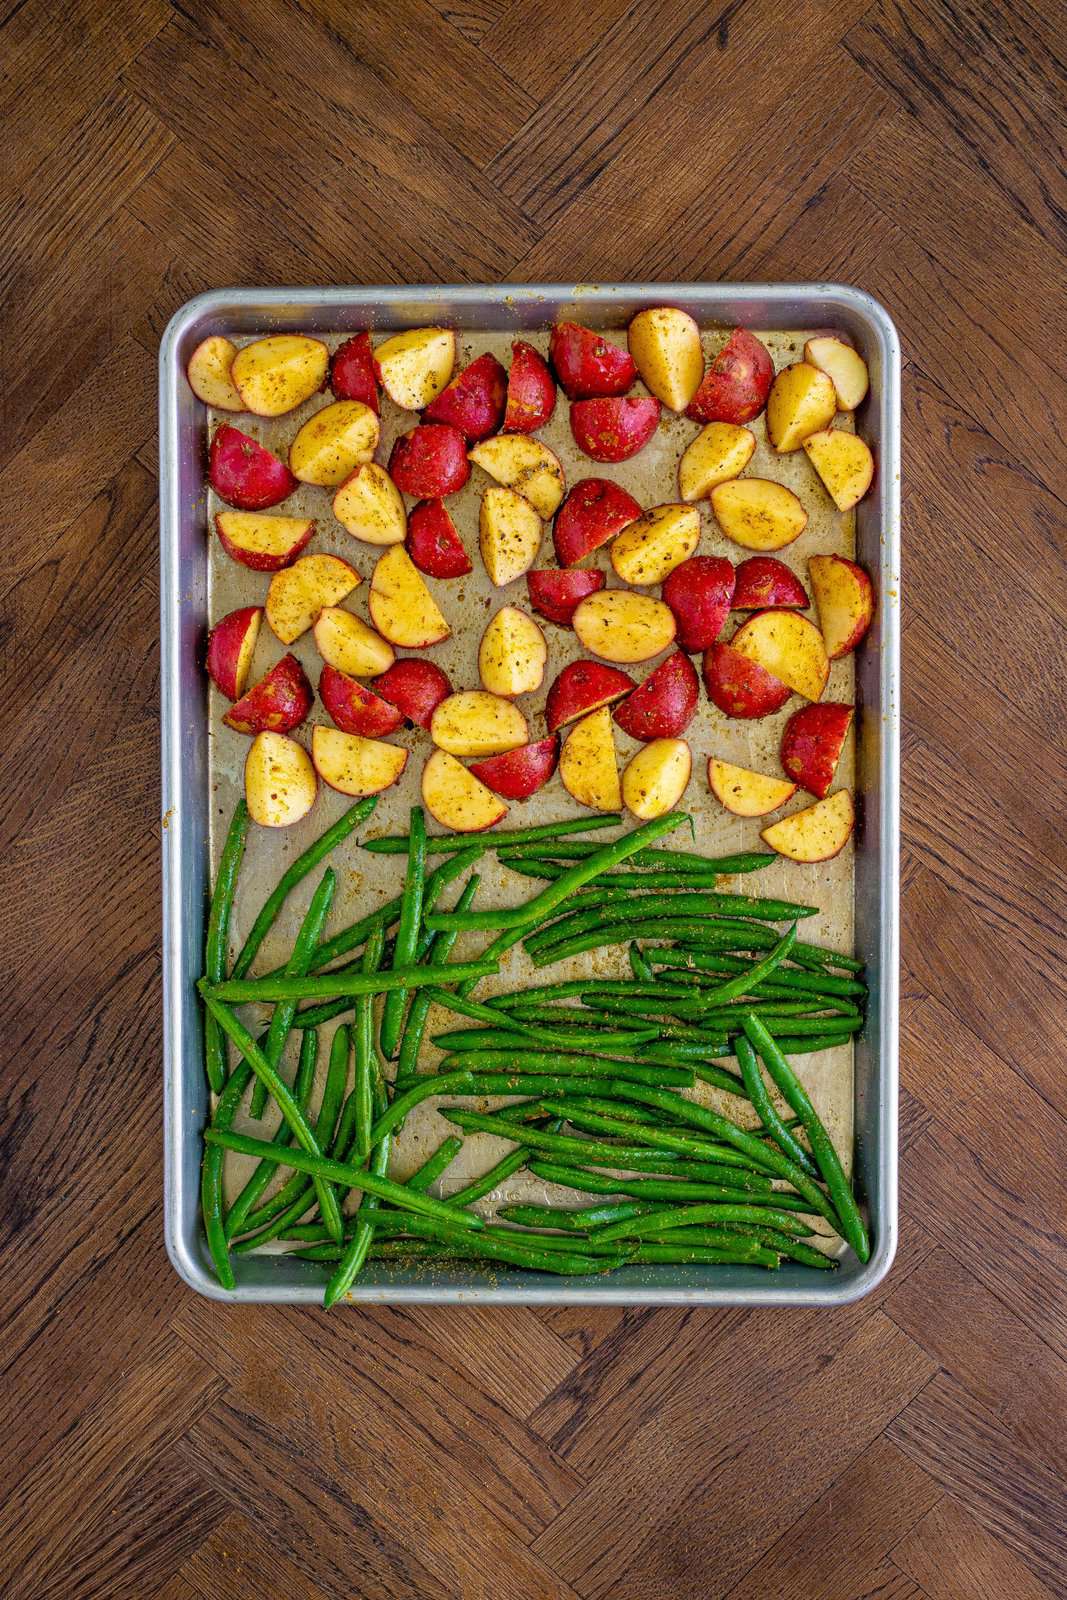 Seasoning mixture rubbed all over potatoes and green beans on sheet pan.